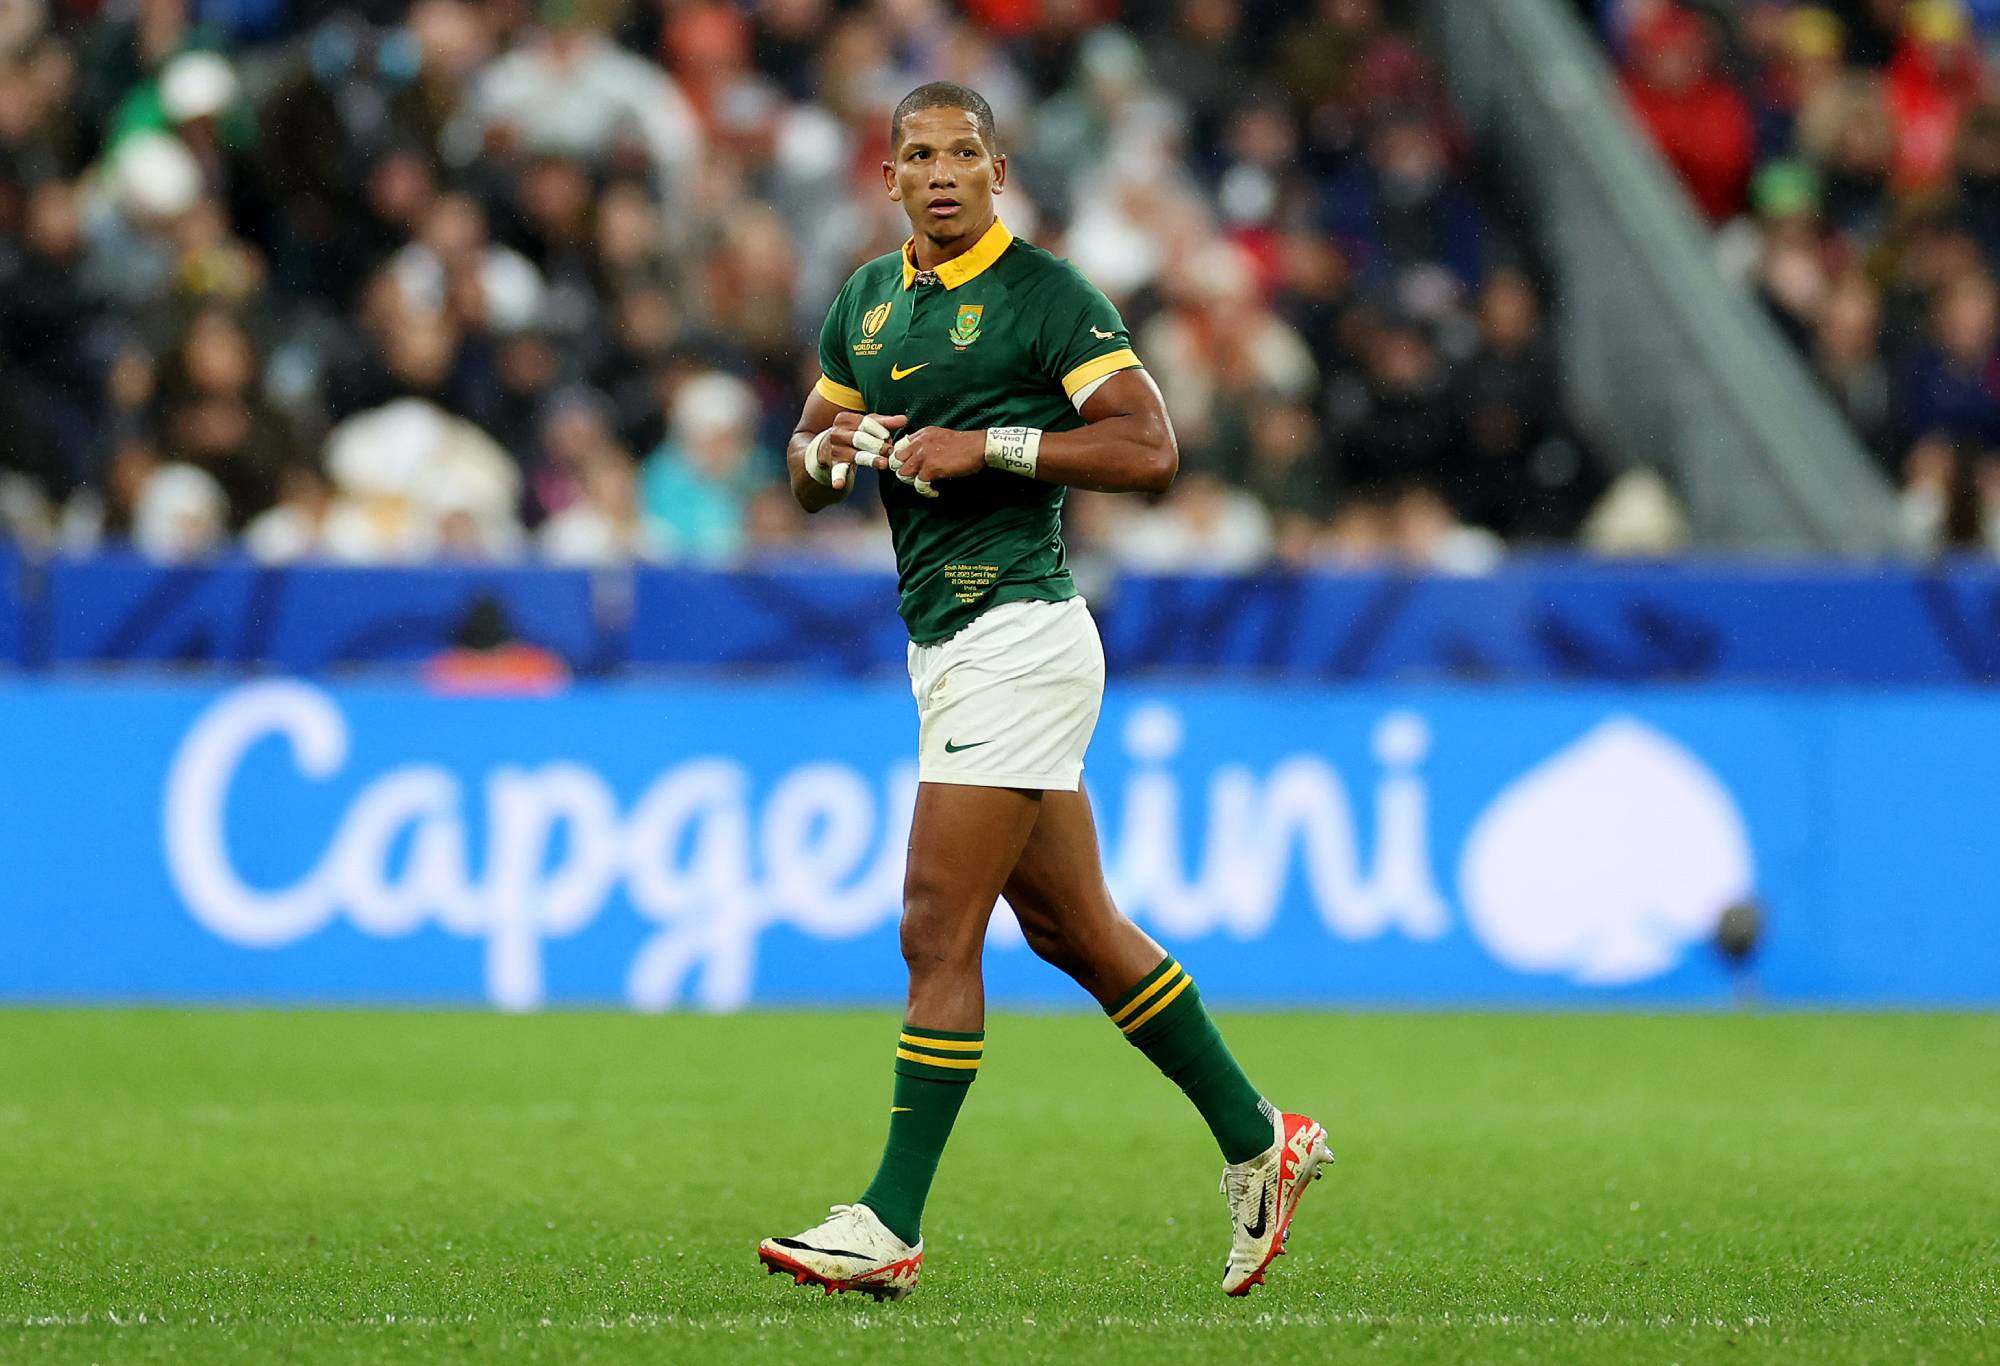 Manie Libbok of South Africa is substituted off the field during the Rugby World Cup France 2023 match between England and South Africa at Stade de France on October 21, 2023 in Paris, France. (Photo by Cameron Spencer/Getty Images)